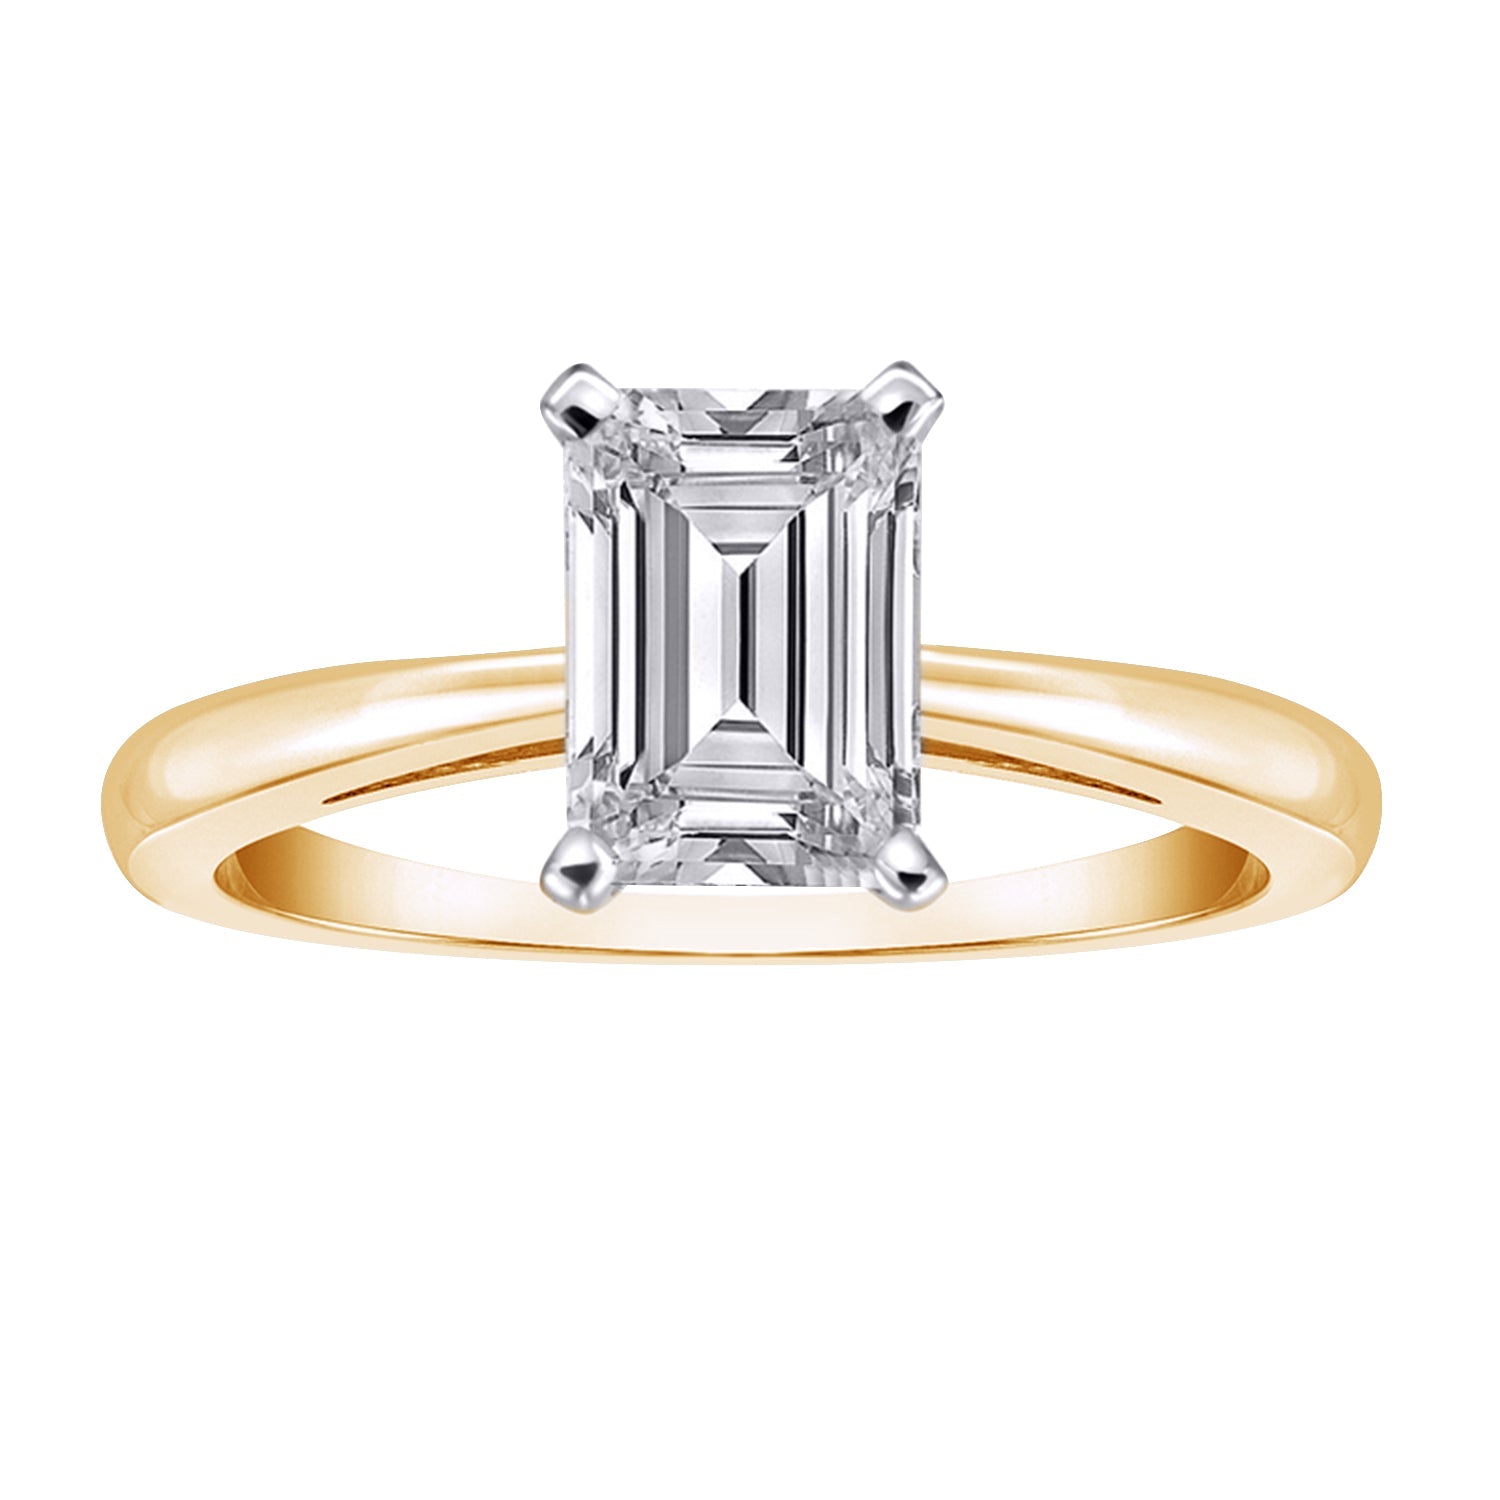 14K 1.00 CT LAB GROWN DIAMOND EMERALD CUT SOLITAIRE ENGAGEMENT RING.